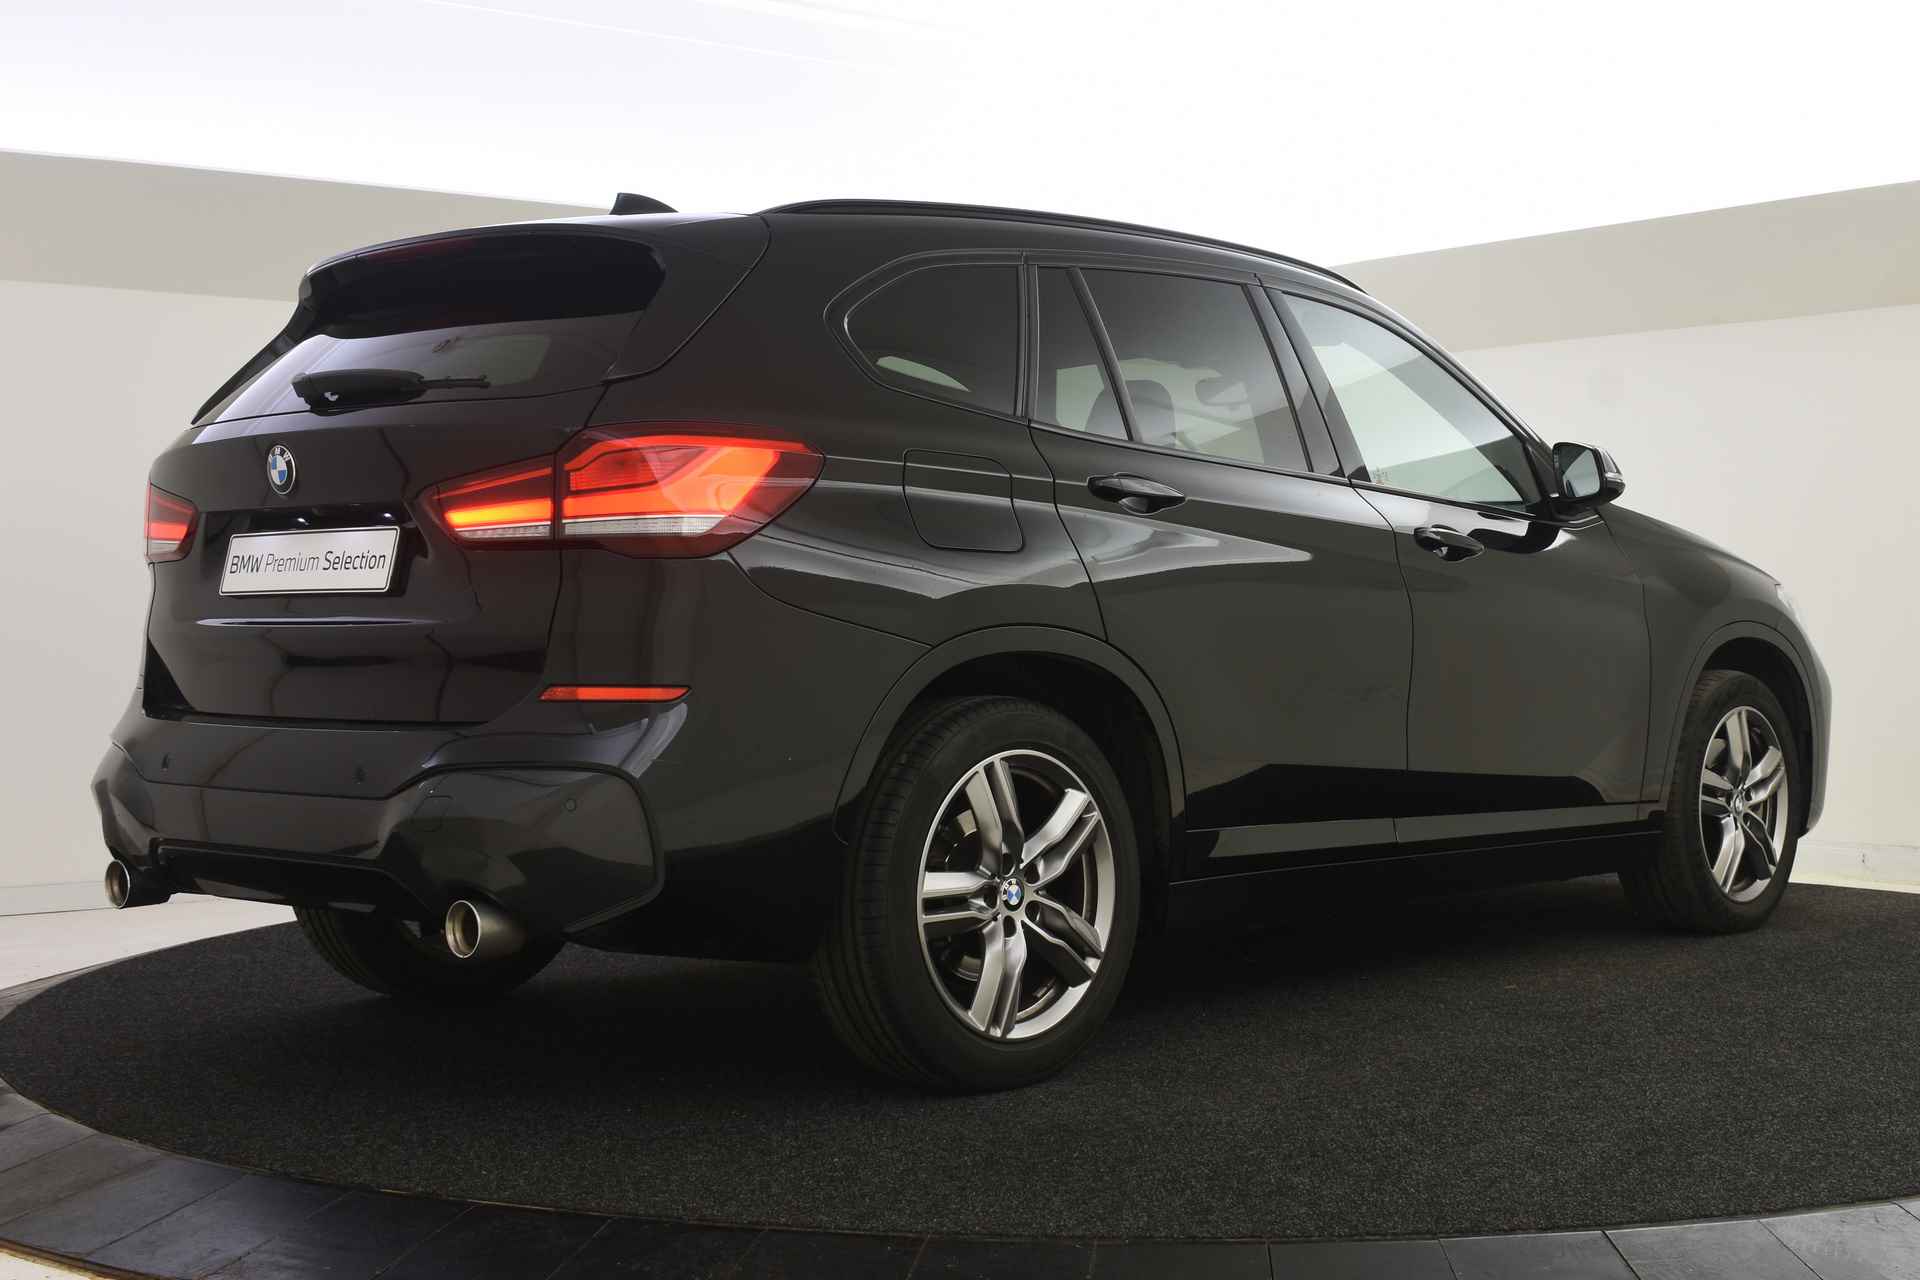 BMW X1 sDrive20i Executive M Sport Automaat / Sportstoelen / Adaptieve LED / Active Cruise Control / Achteruitrijcamera / Head-Up / Park Assistant / Driving Assistant Plus - 3/47